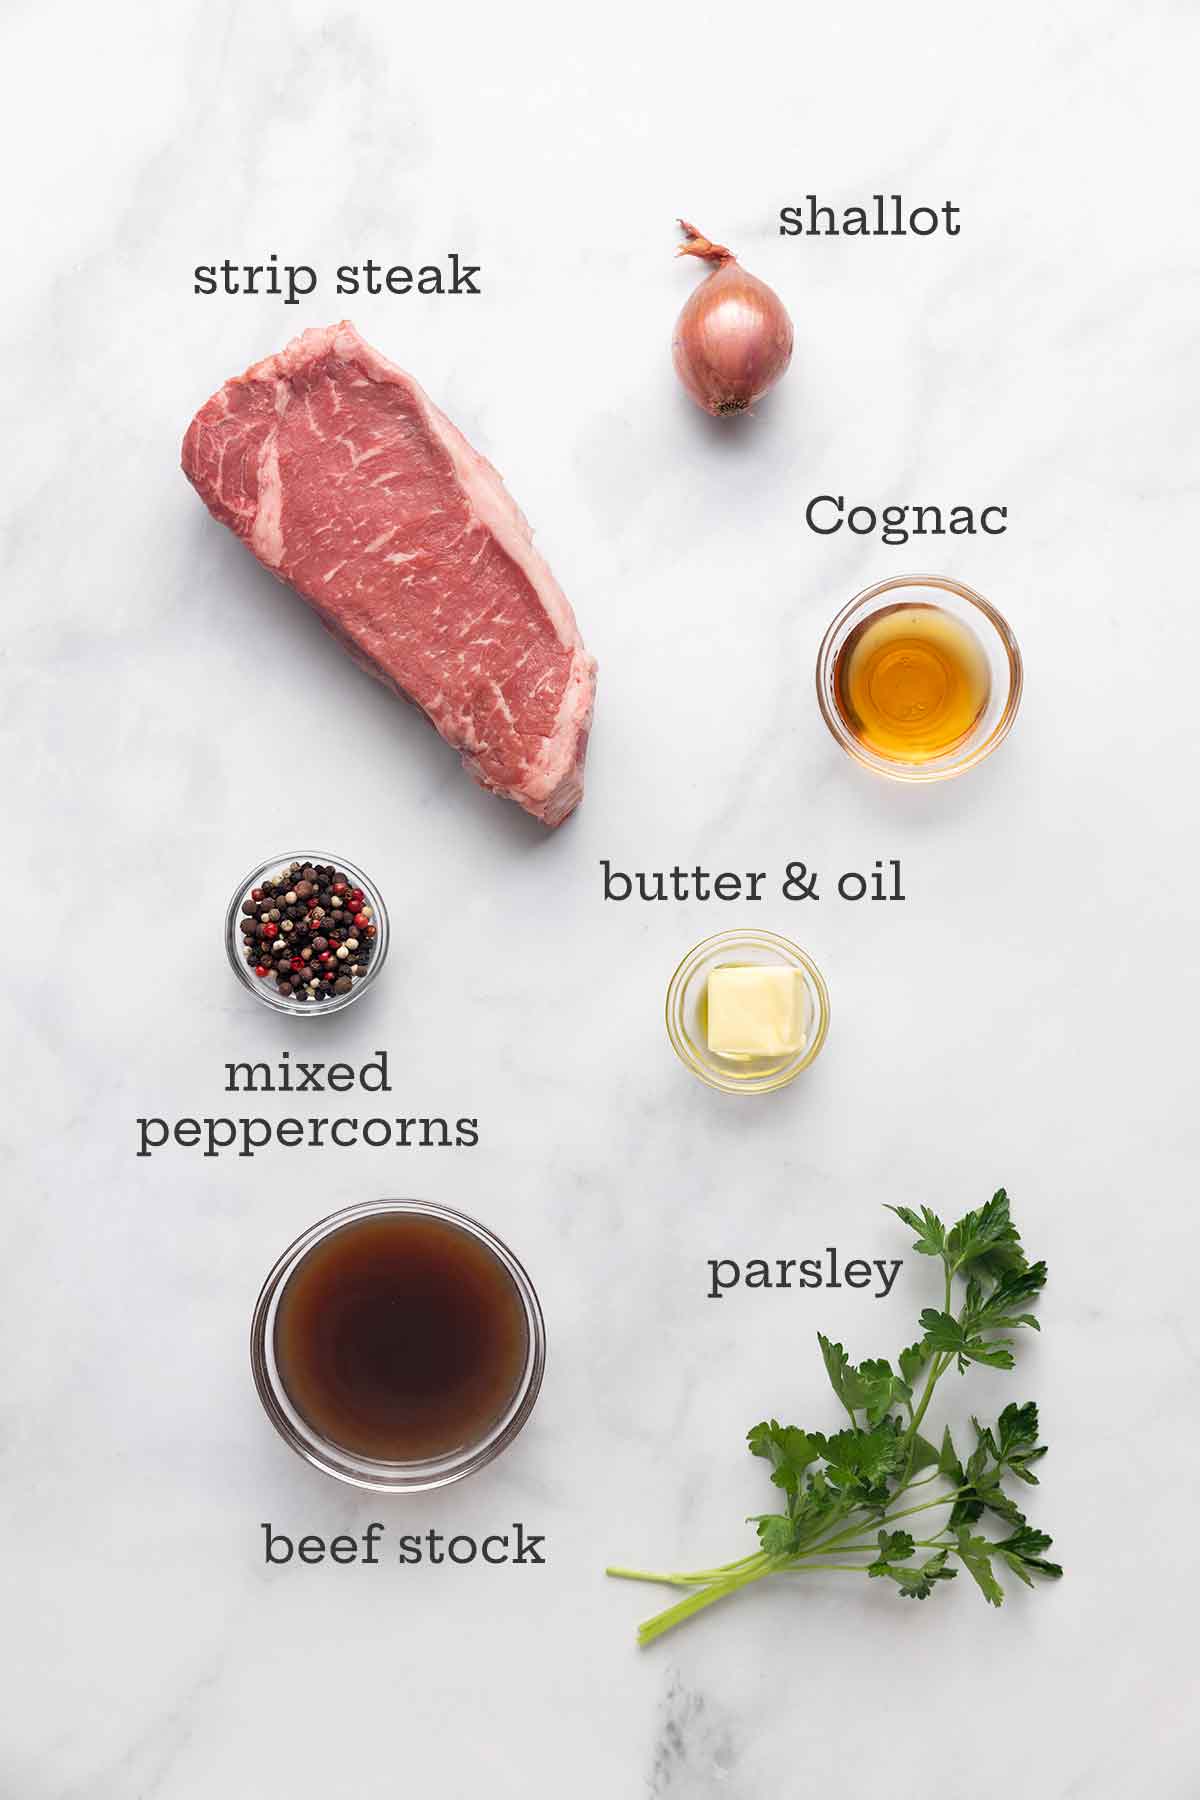 Ingredients for steak au poivre--strip steak, shallot, Cognac, peppercorns, butter and oil, stock, and parsley.